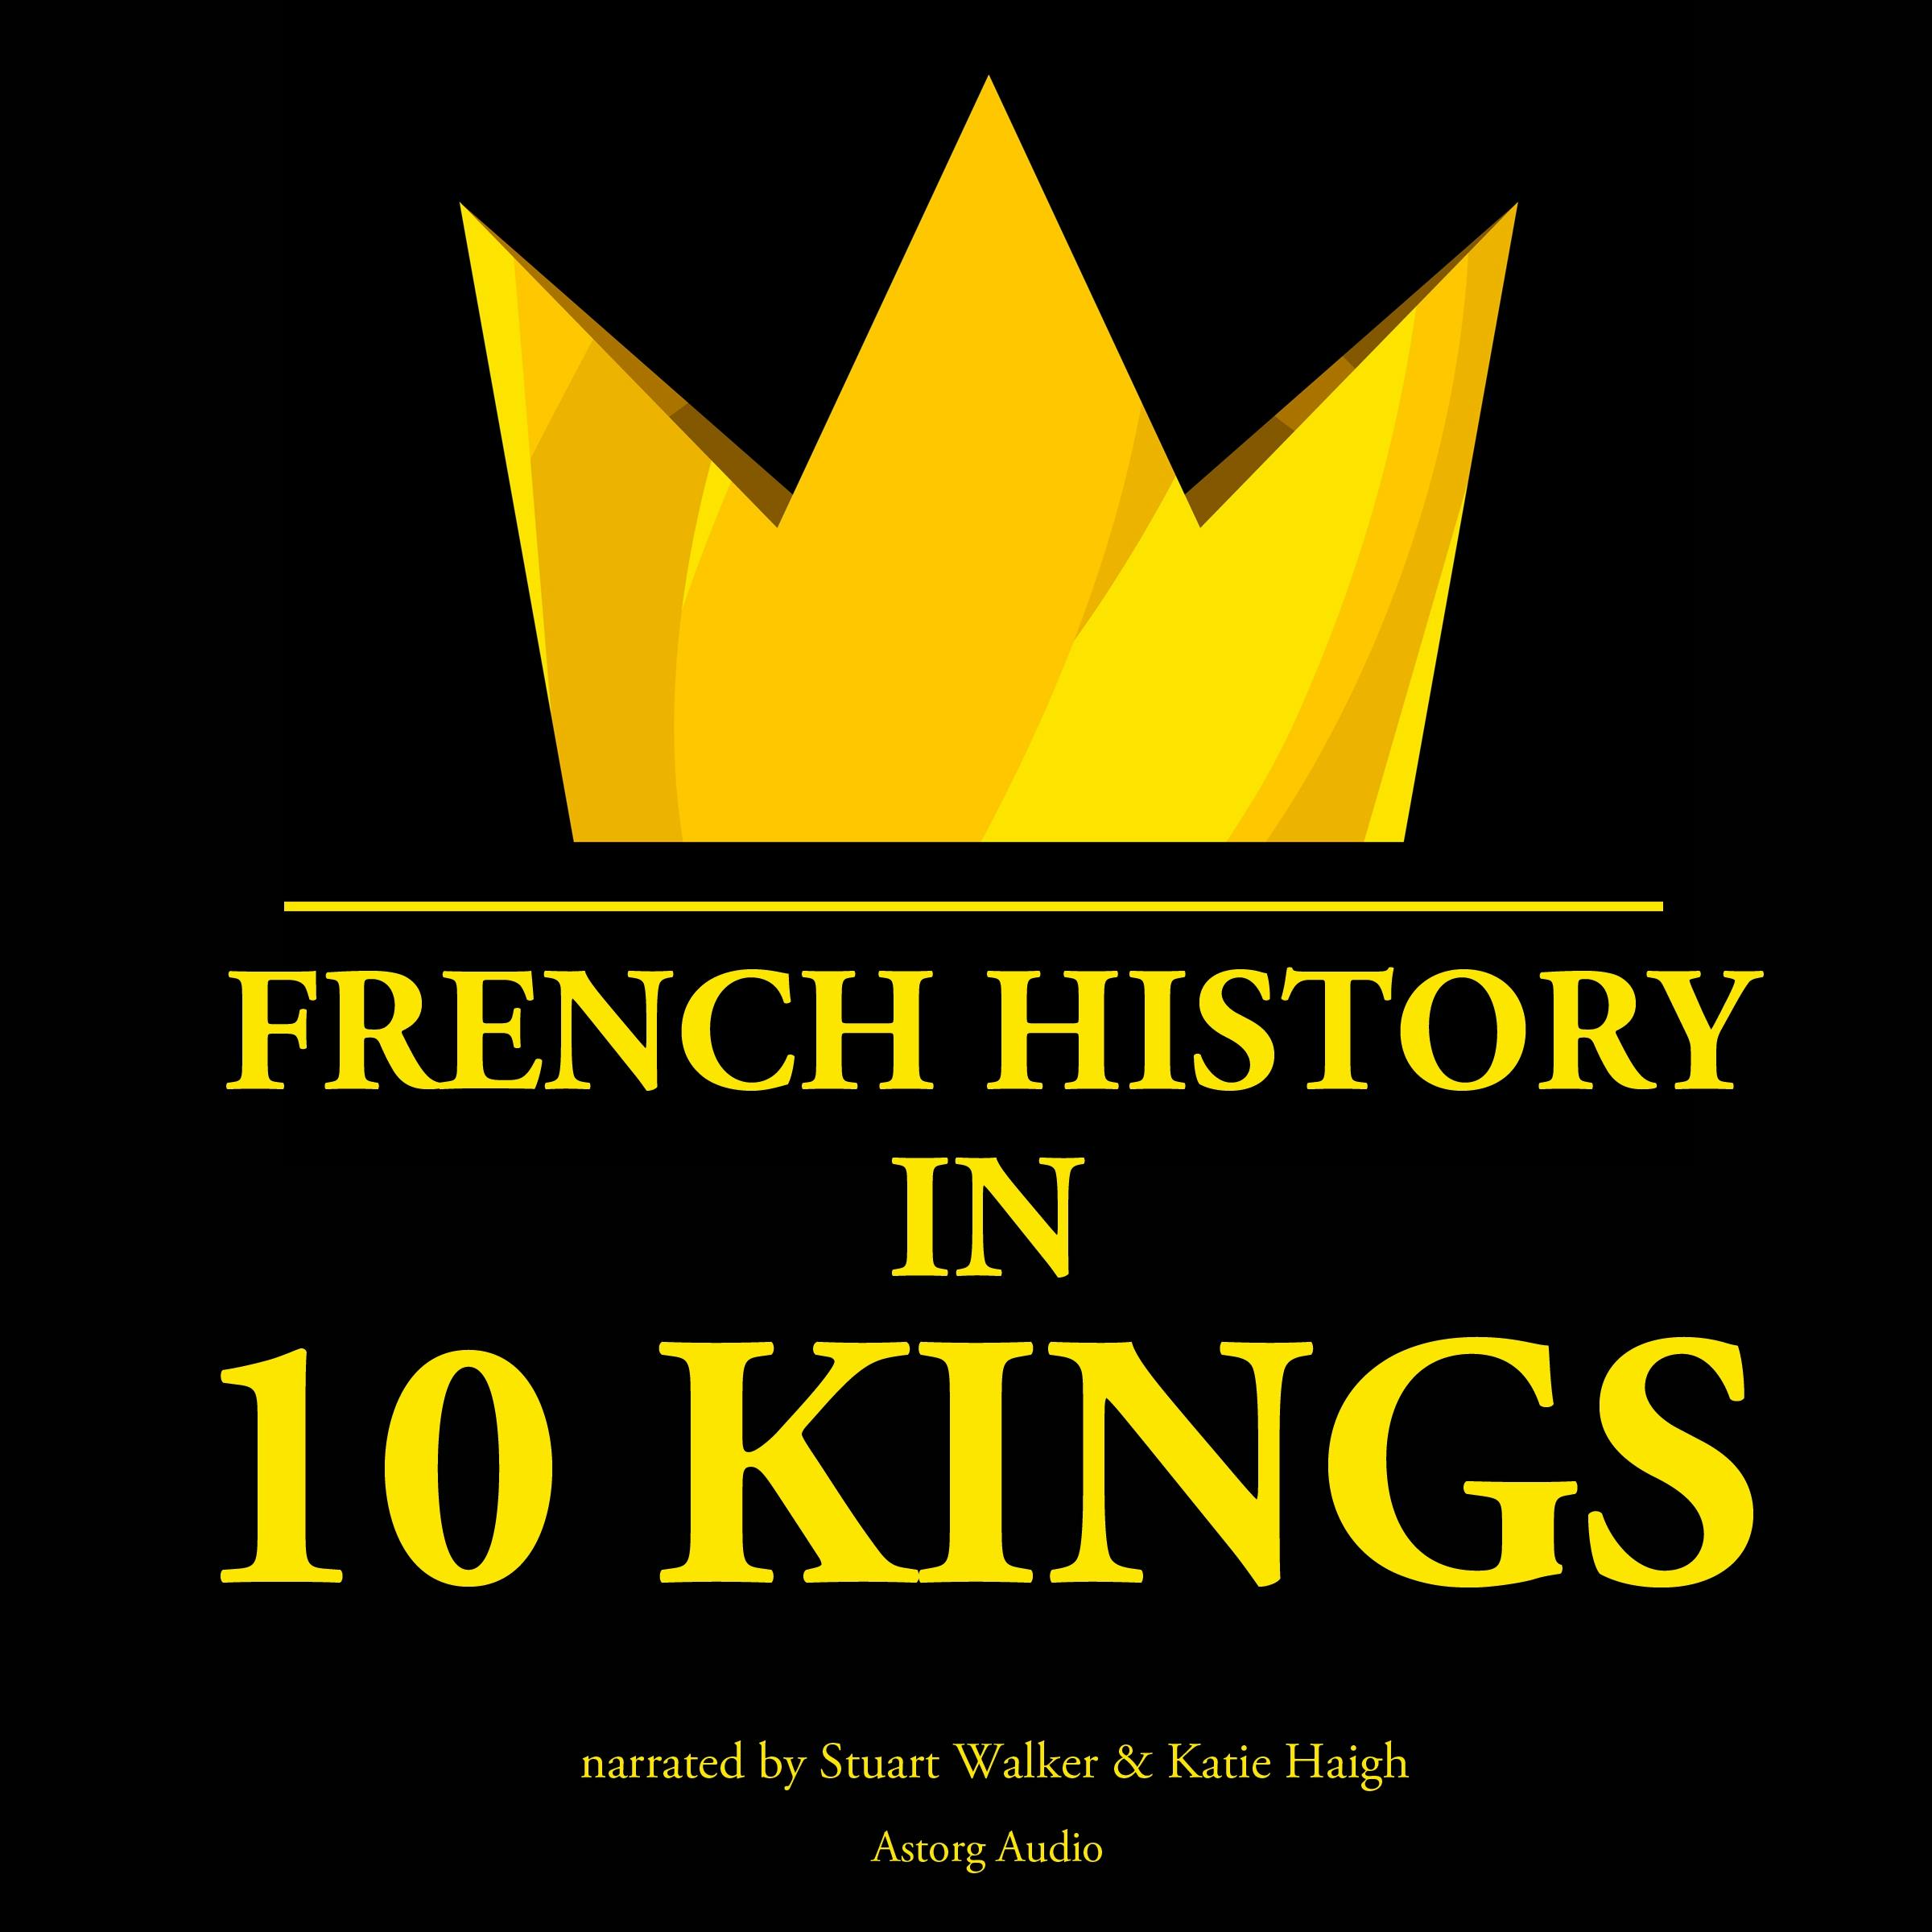 French History in 10 Kings: French History - James Gardner